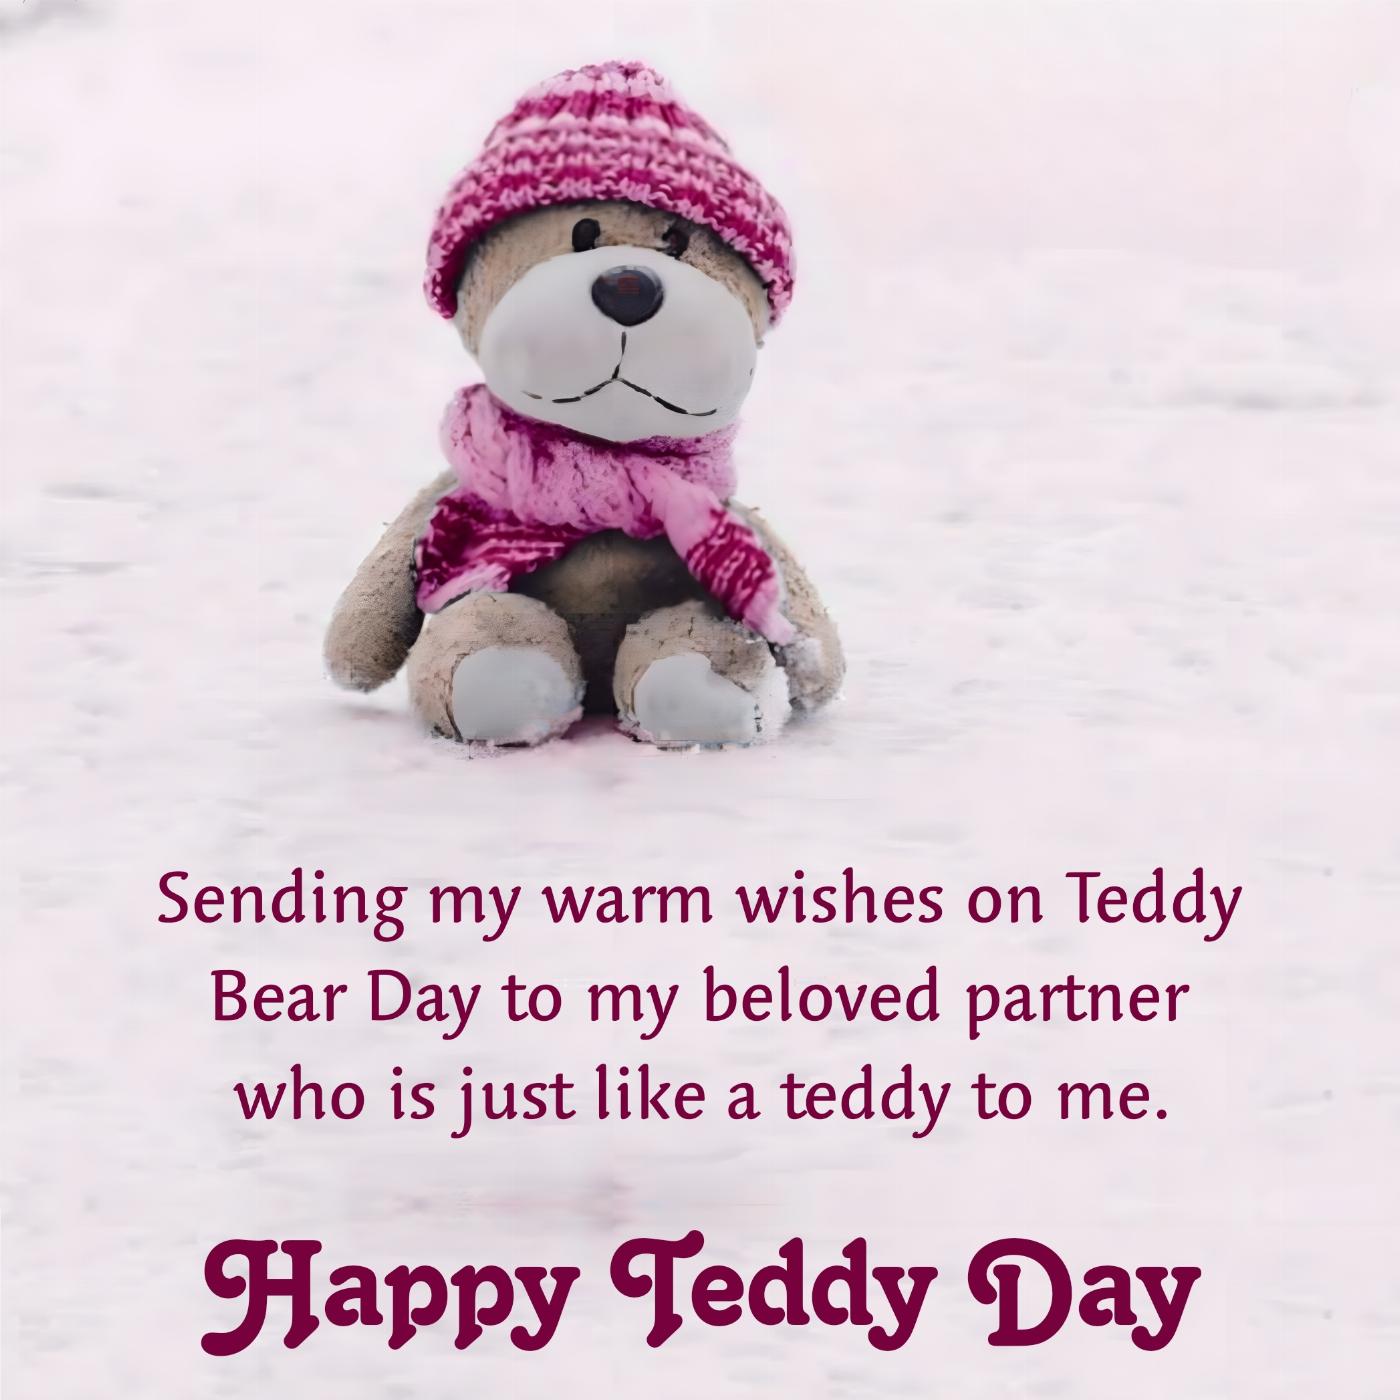 Sending my warm wishes on Teddy Bear Day to my beloved partner